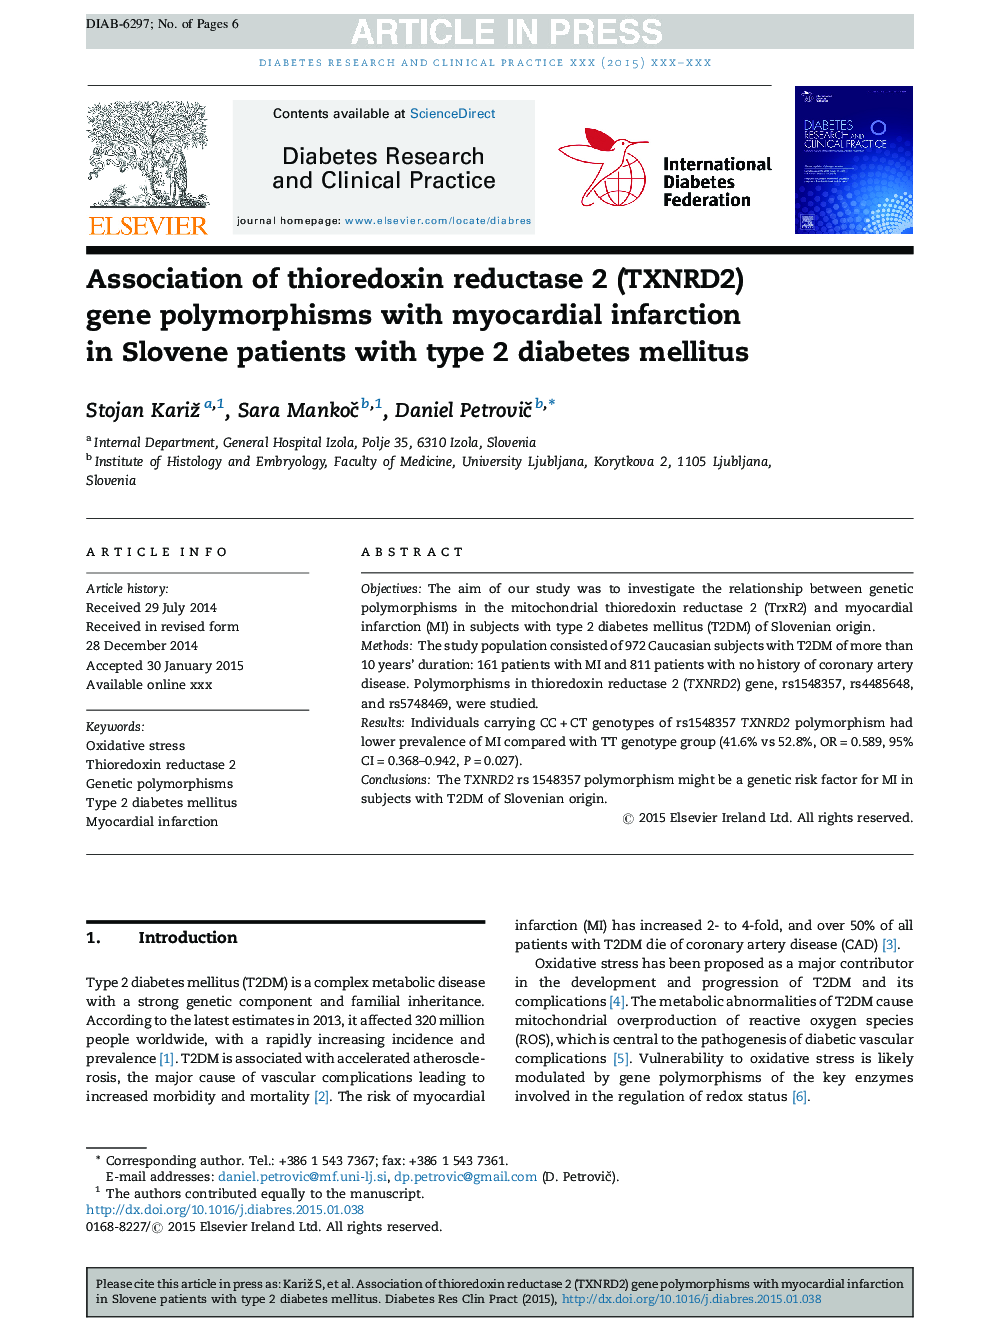 Association of thioredoxin reductase 2 (TXNRD2) gene polymorphisms with myocardial infarction in Slovene patients with type 2 diabetes mellitus